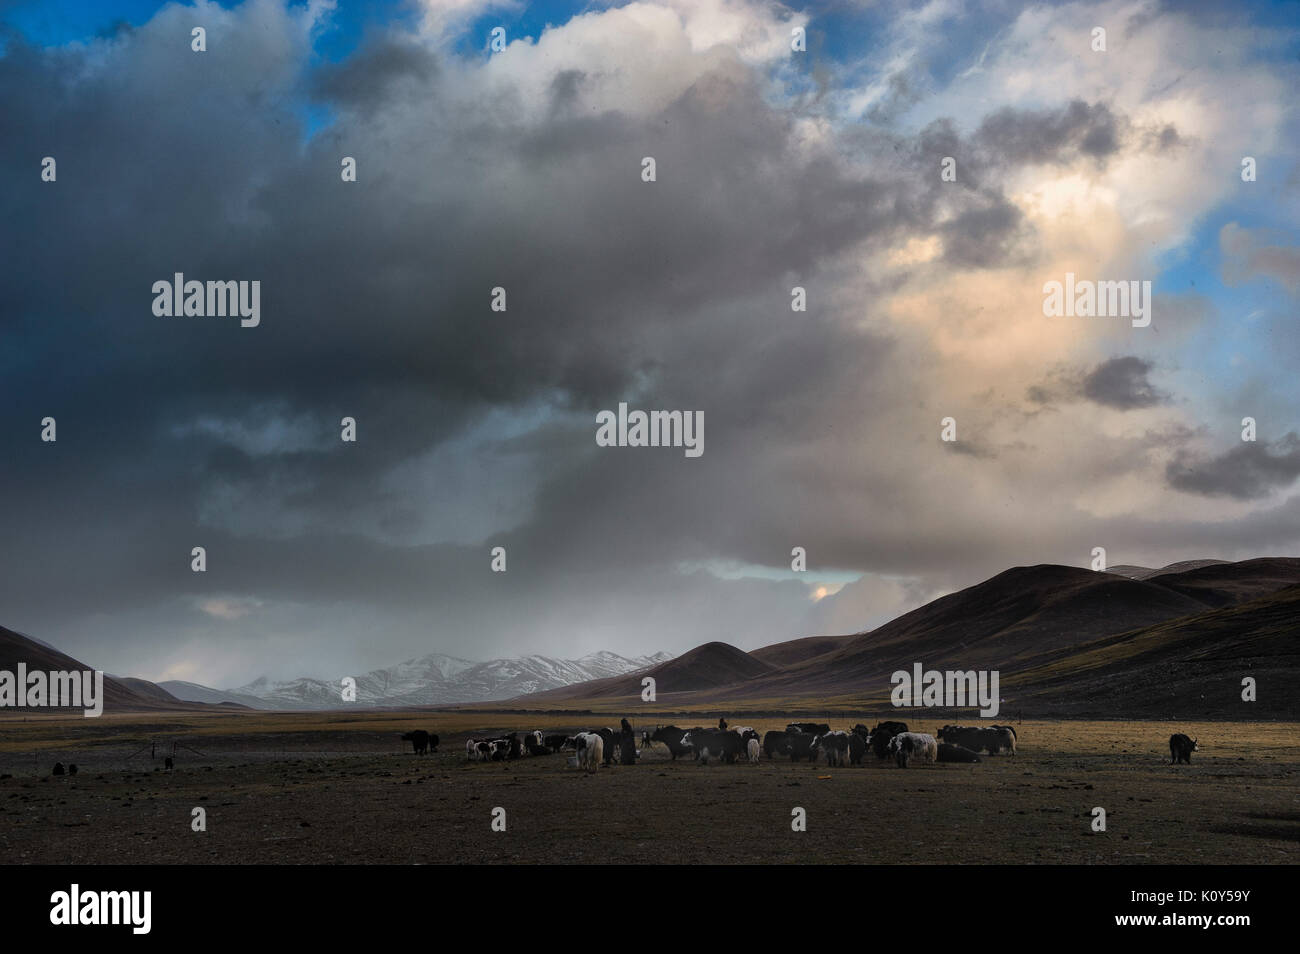 Tibetan nomads tying their yaks around their campsite on the highlands of the Tibetan plateau Stock Photo